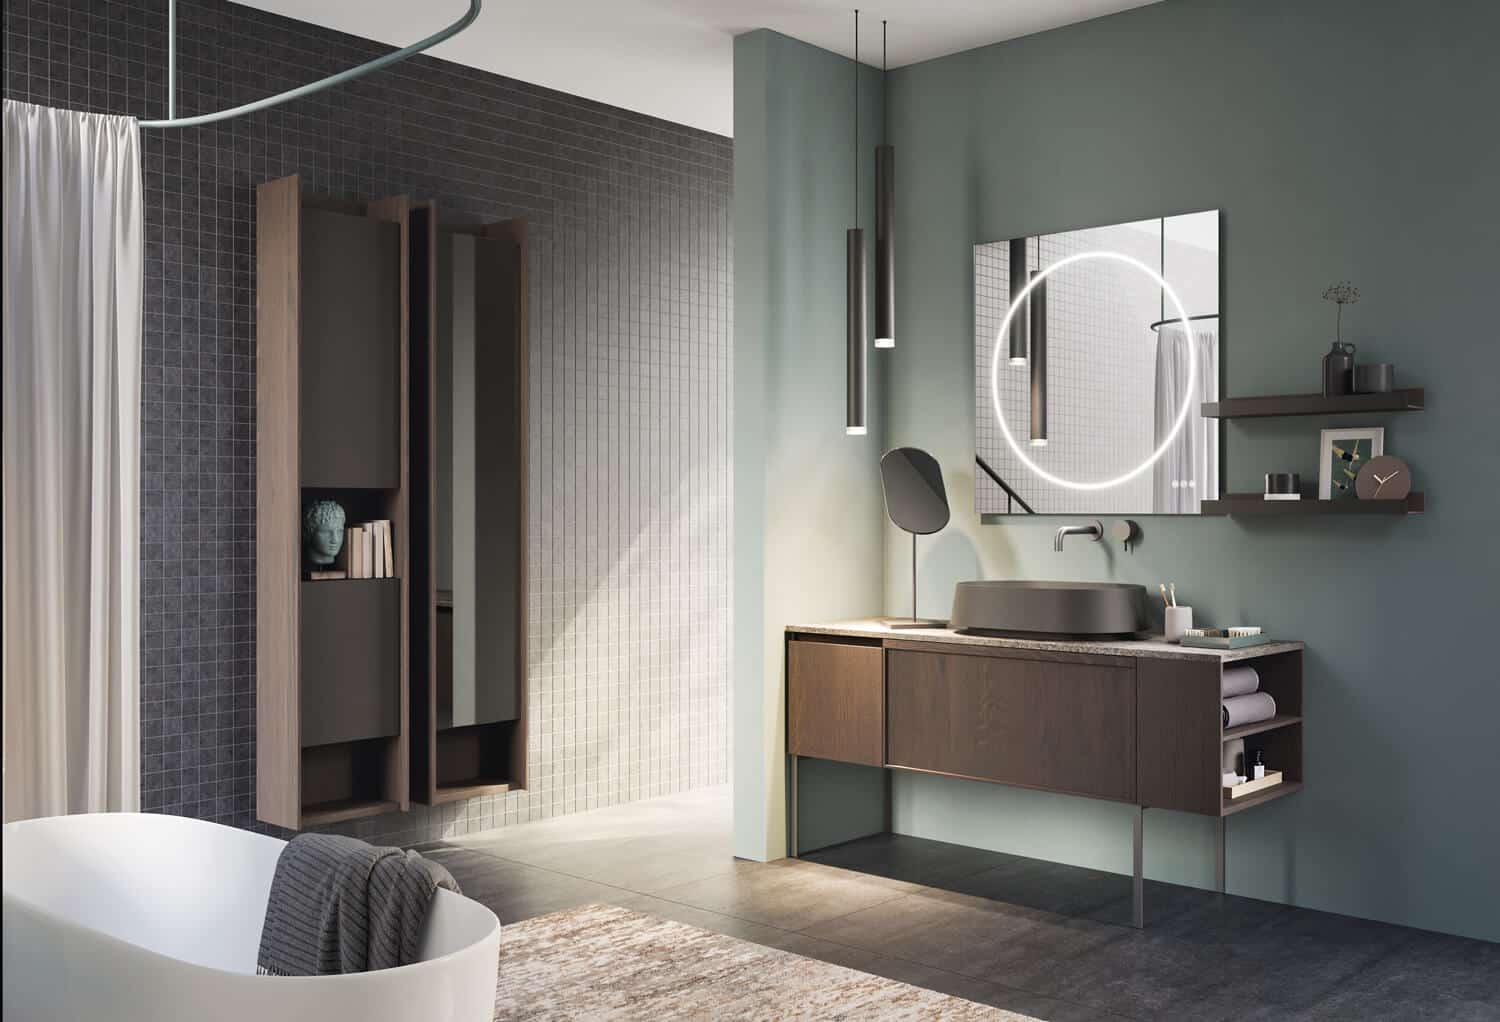 Cabinets with framed door and flat door in Rovere Tasso. Top in Porfido Marrone ceramic. Oval Vulcan washbasin in Lava matte Teknorit. One of the tall columns has a mirrored door. The main mirror has built-in central lights. 